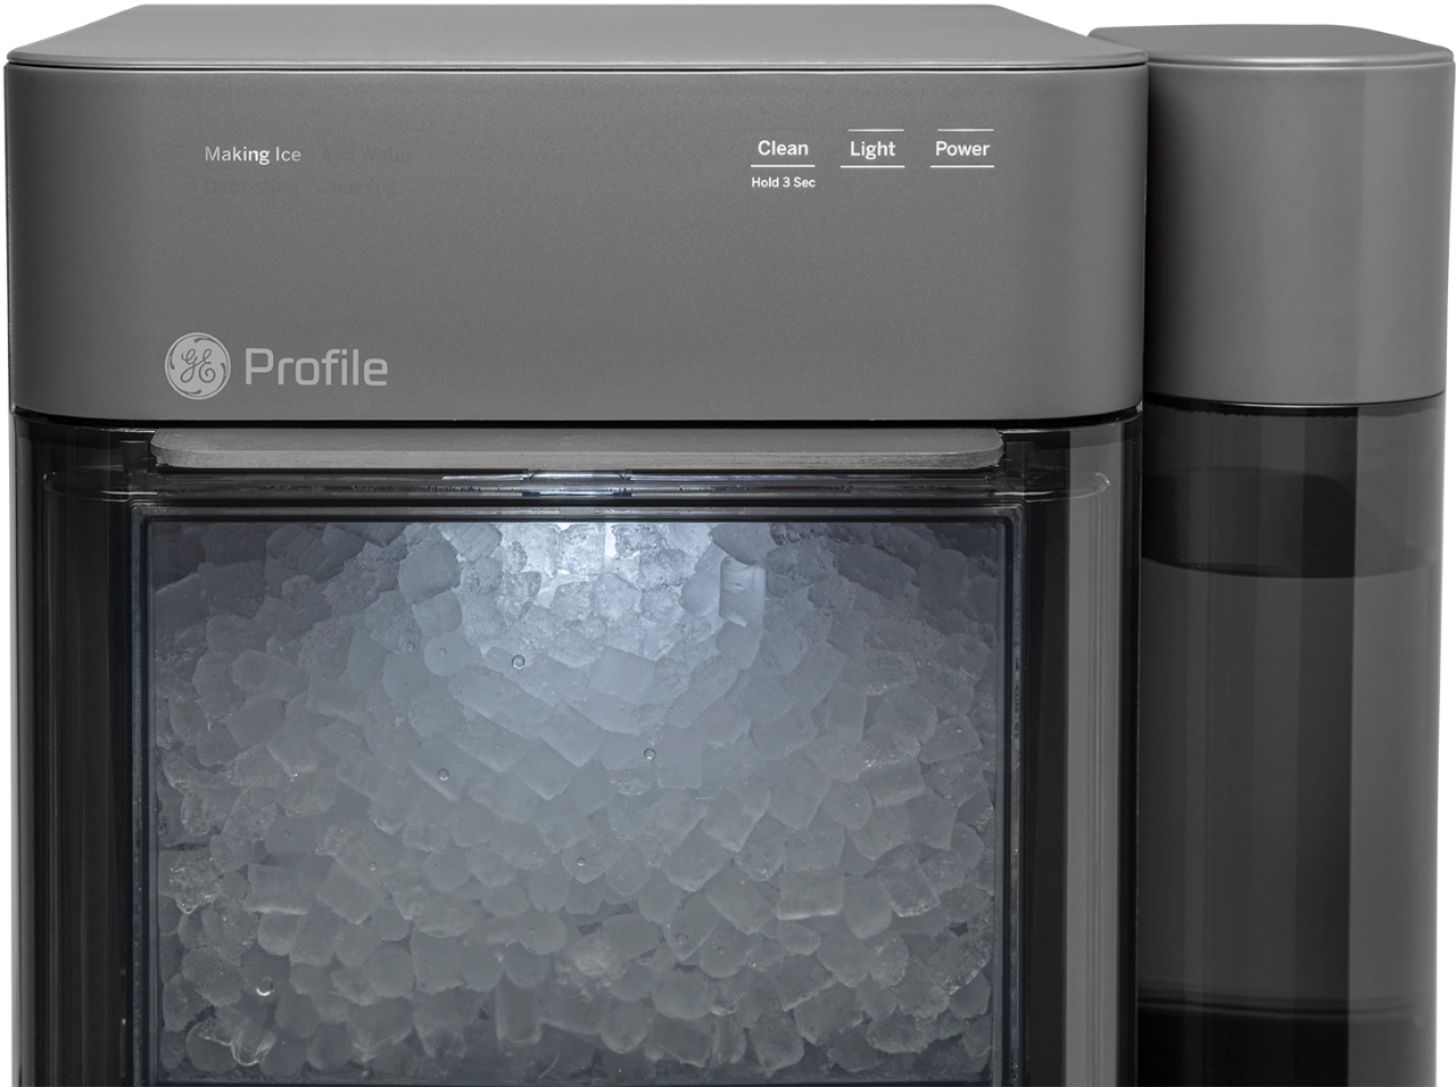 GE Profile Opal 2.0 38-lb. Portable Ice maker with Nugget Ice Production,  XL 1 Gallon Side Tank and Built-in WiFi Black Stainless Steel XPIOX3BCBT -  Best Buy